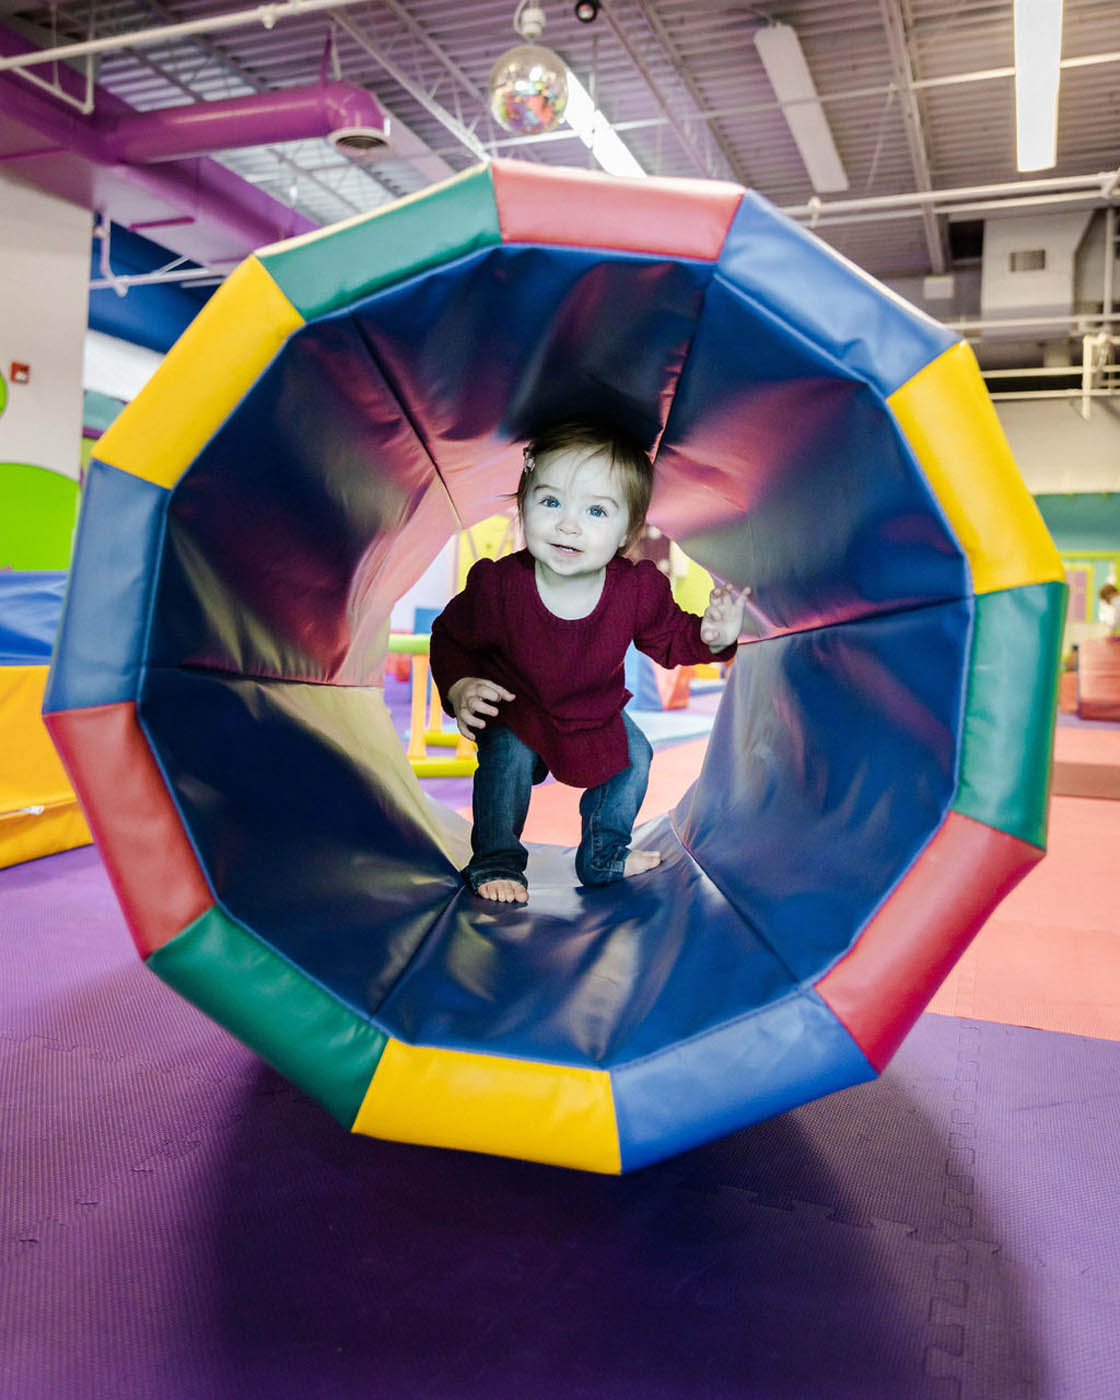 A child crawling through our kid safe gym equipment - experiencing the wonder of our sensory gym in Katy, TX.